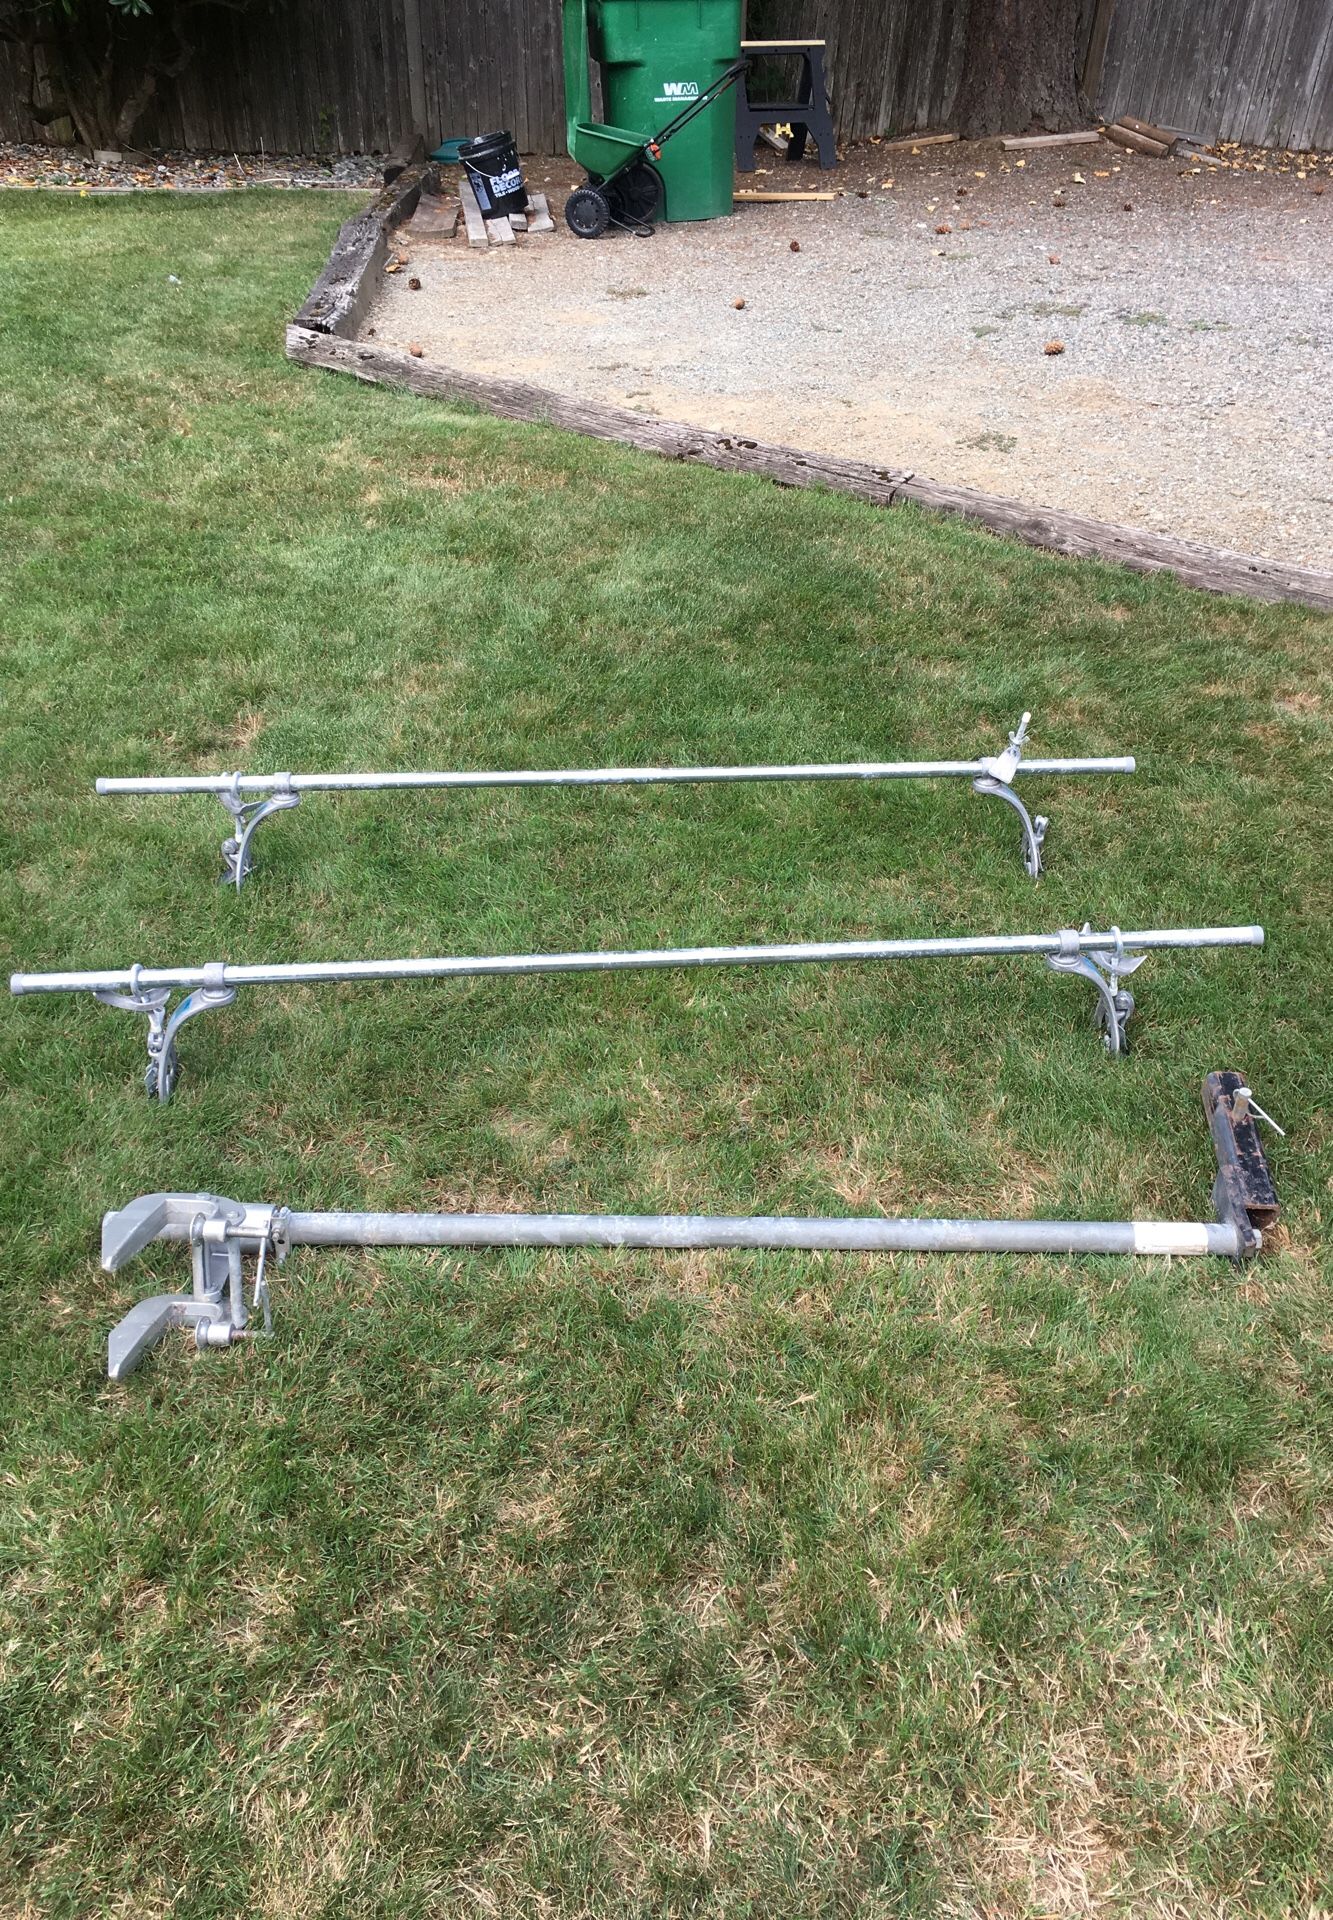 Rack for Ladder, Tools, or even a boat